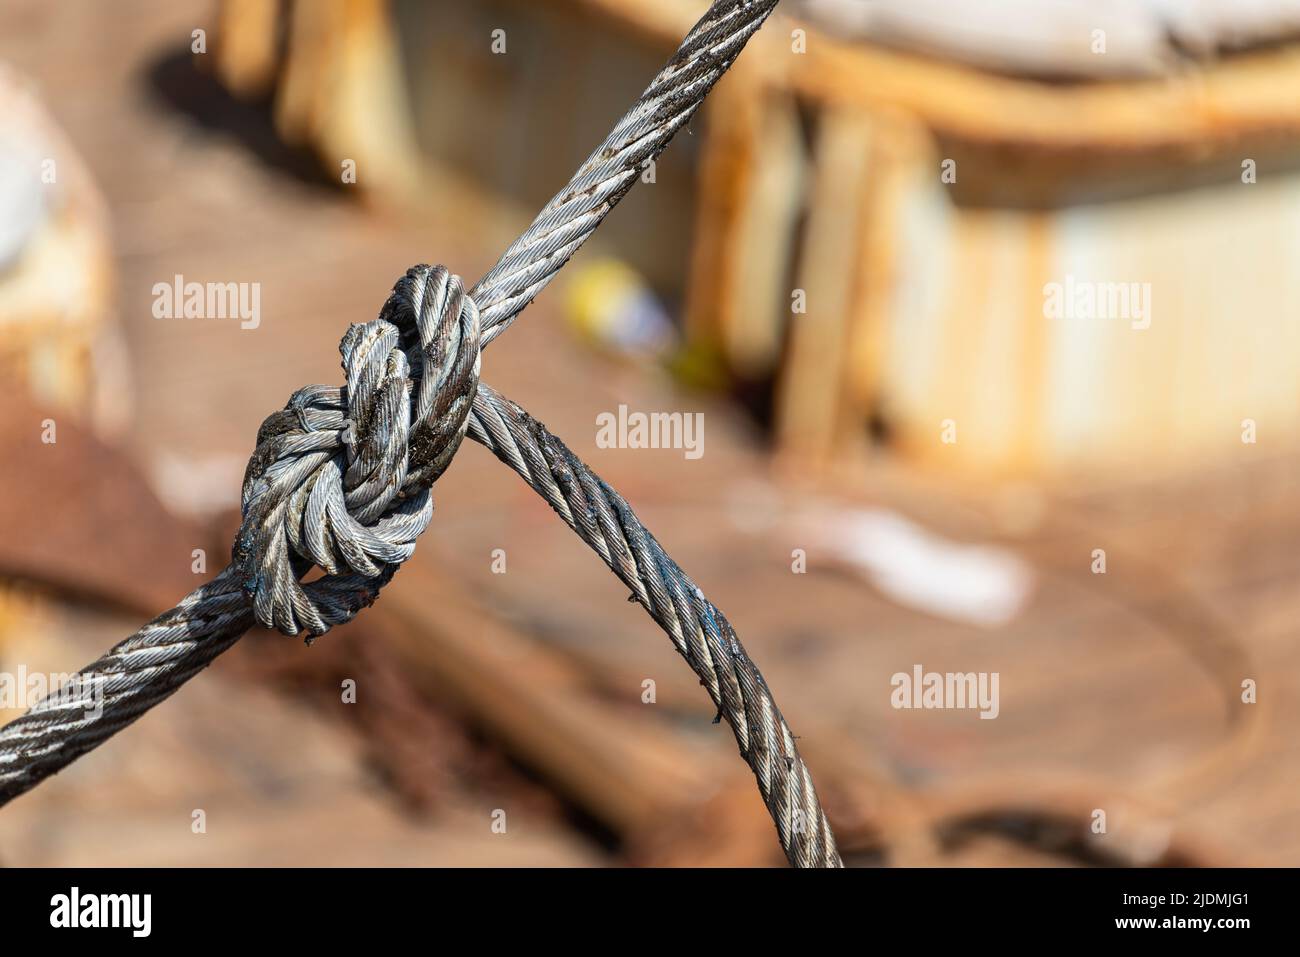 steel cable tied in a knot Stock Photo